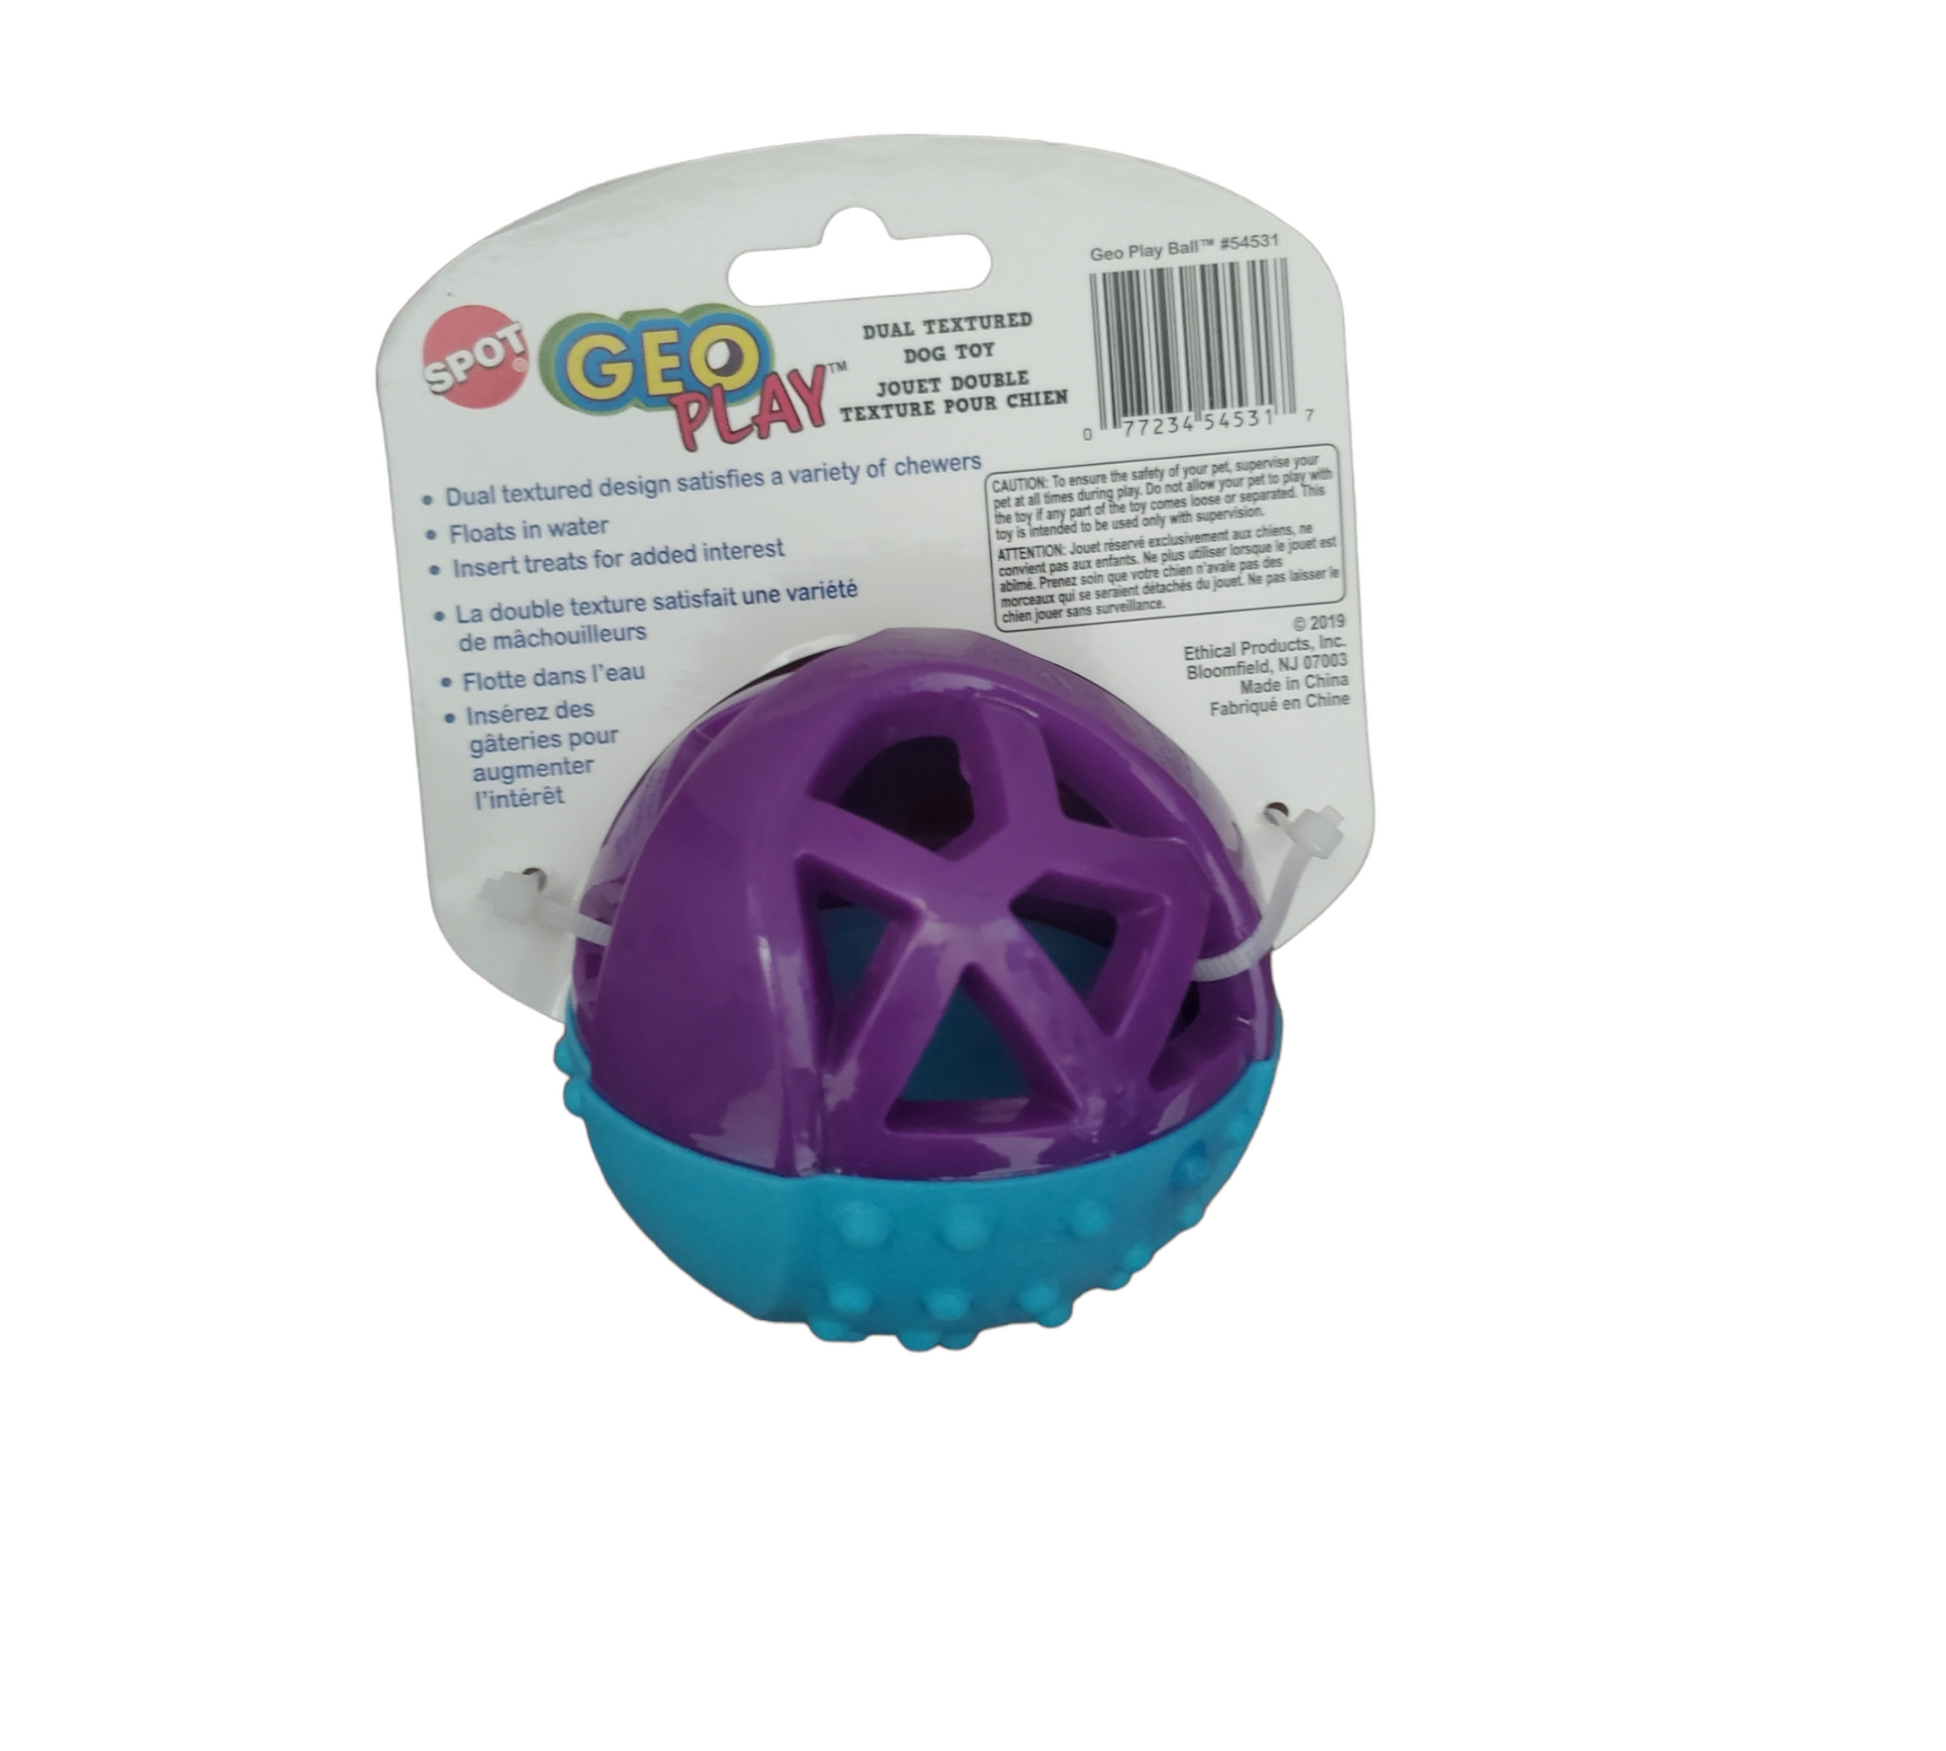 Canine's World Dog Ball Toys Spot Pet Geo Play Dual Textured Ball Large Squeaky Dog Chew Toy, Color Varies Spot